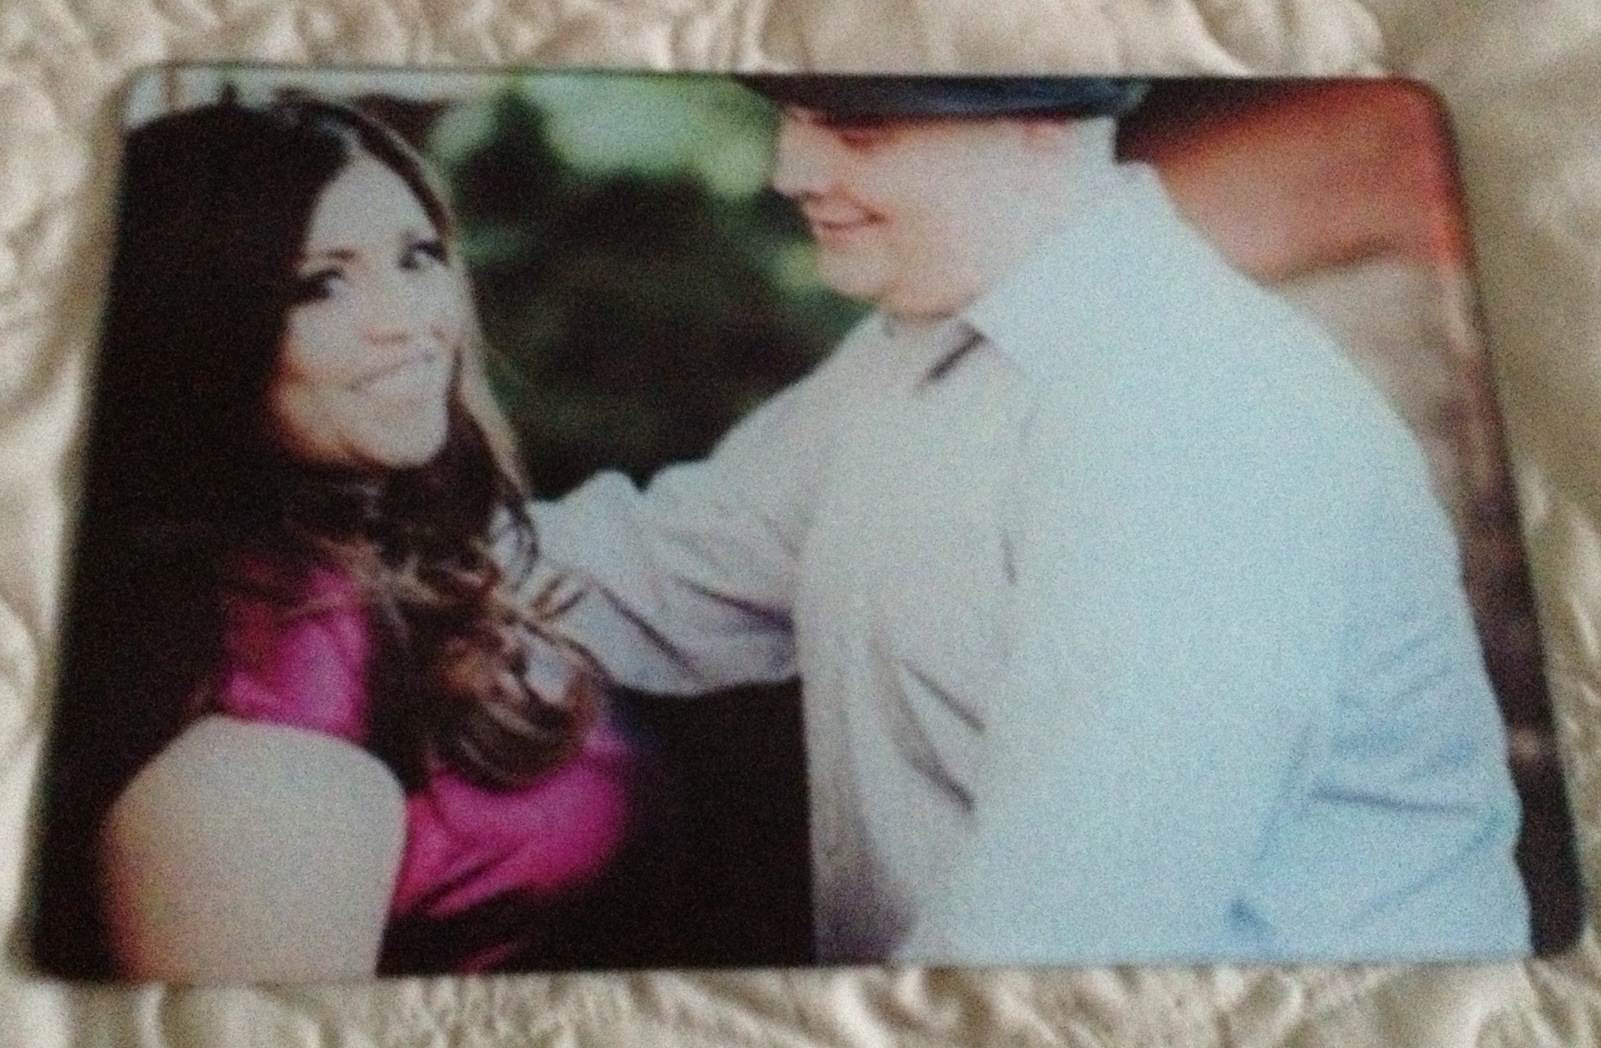 Engagement Cutting Mat made with sublimation printing